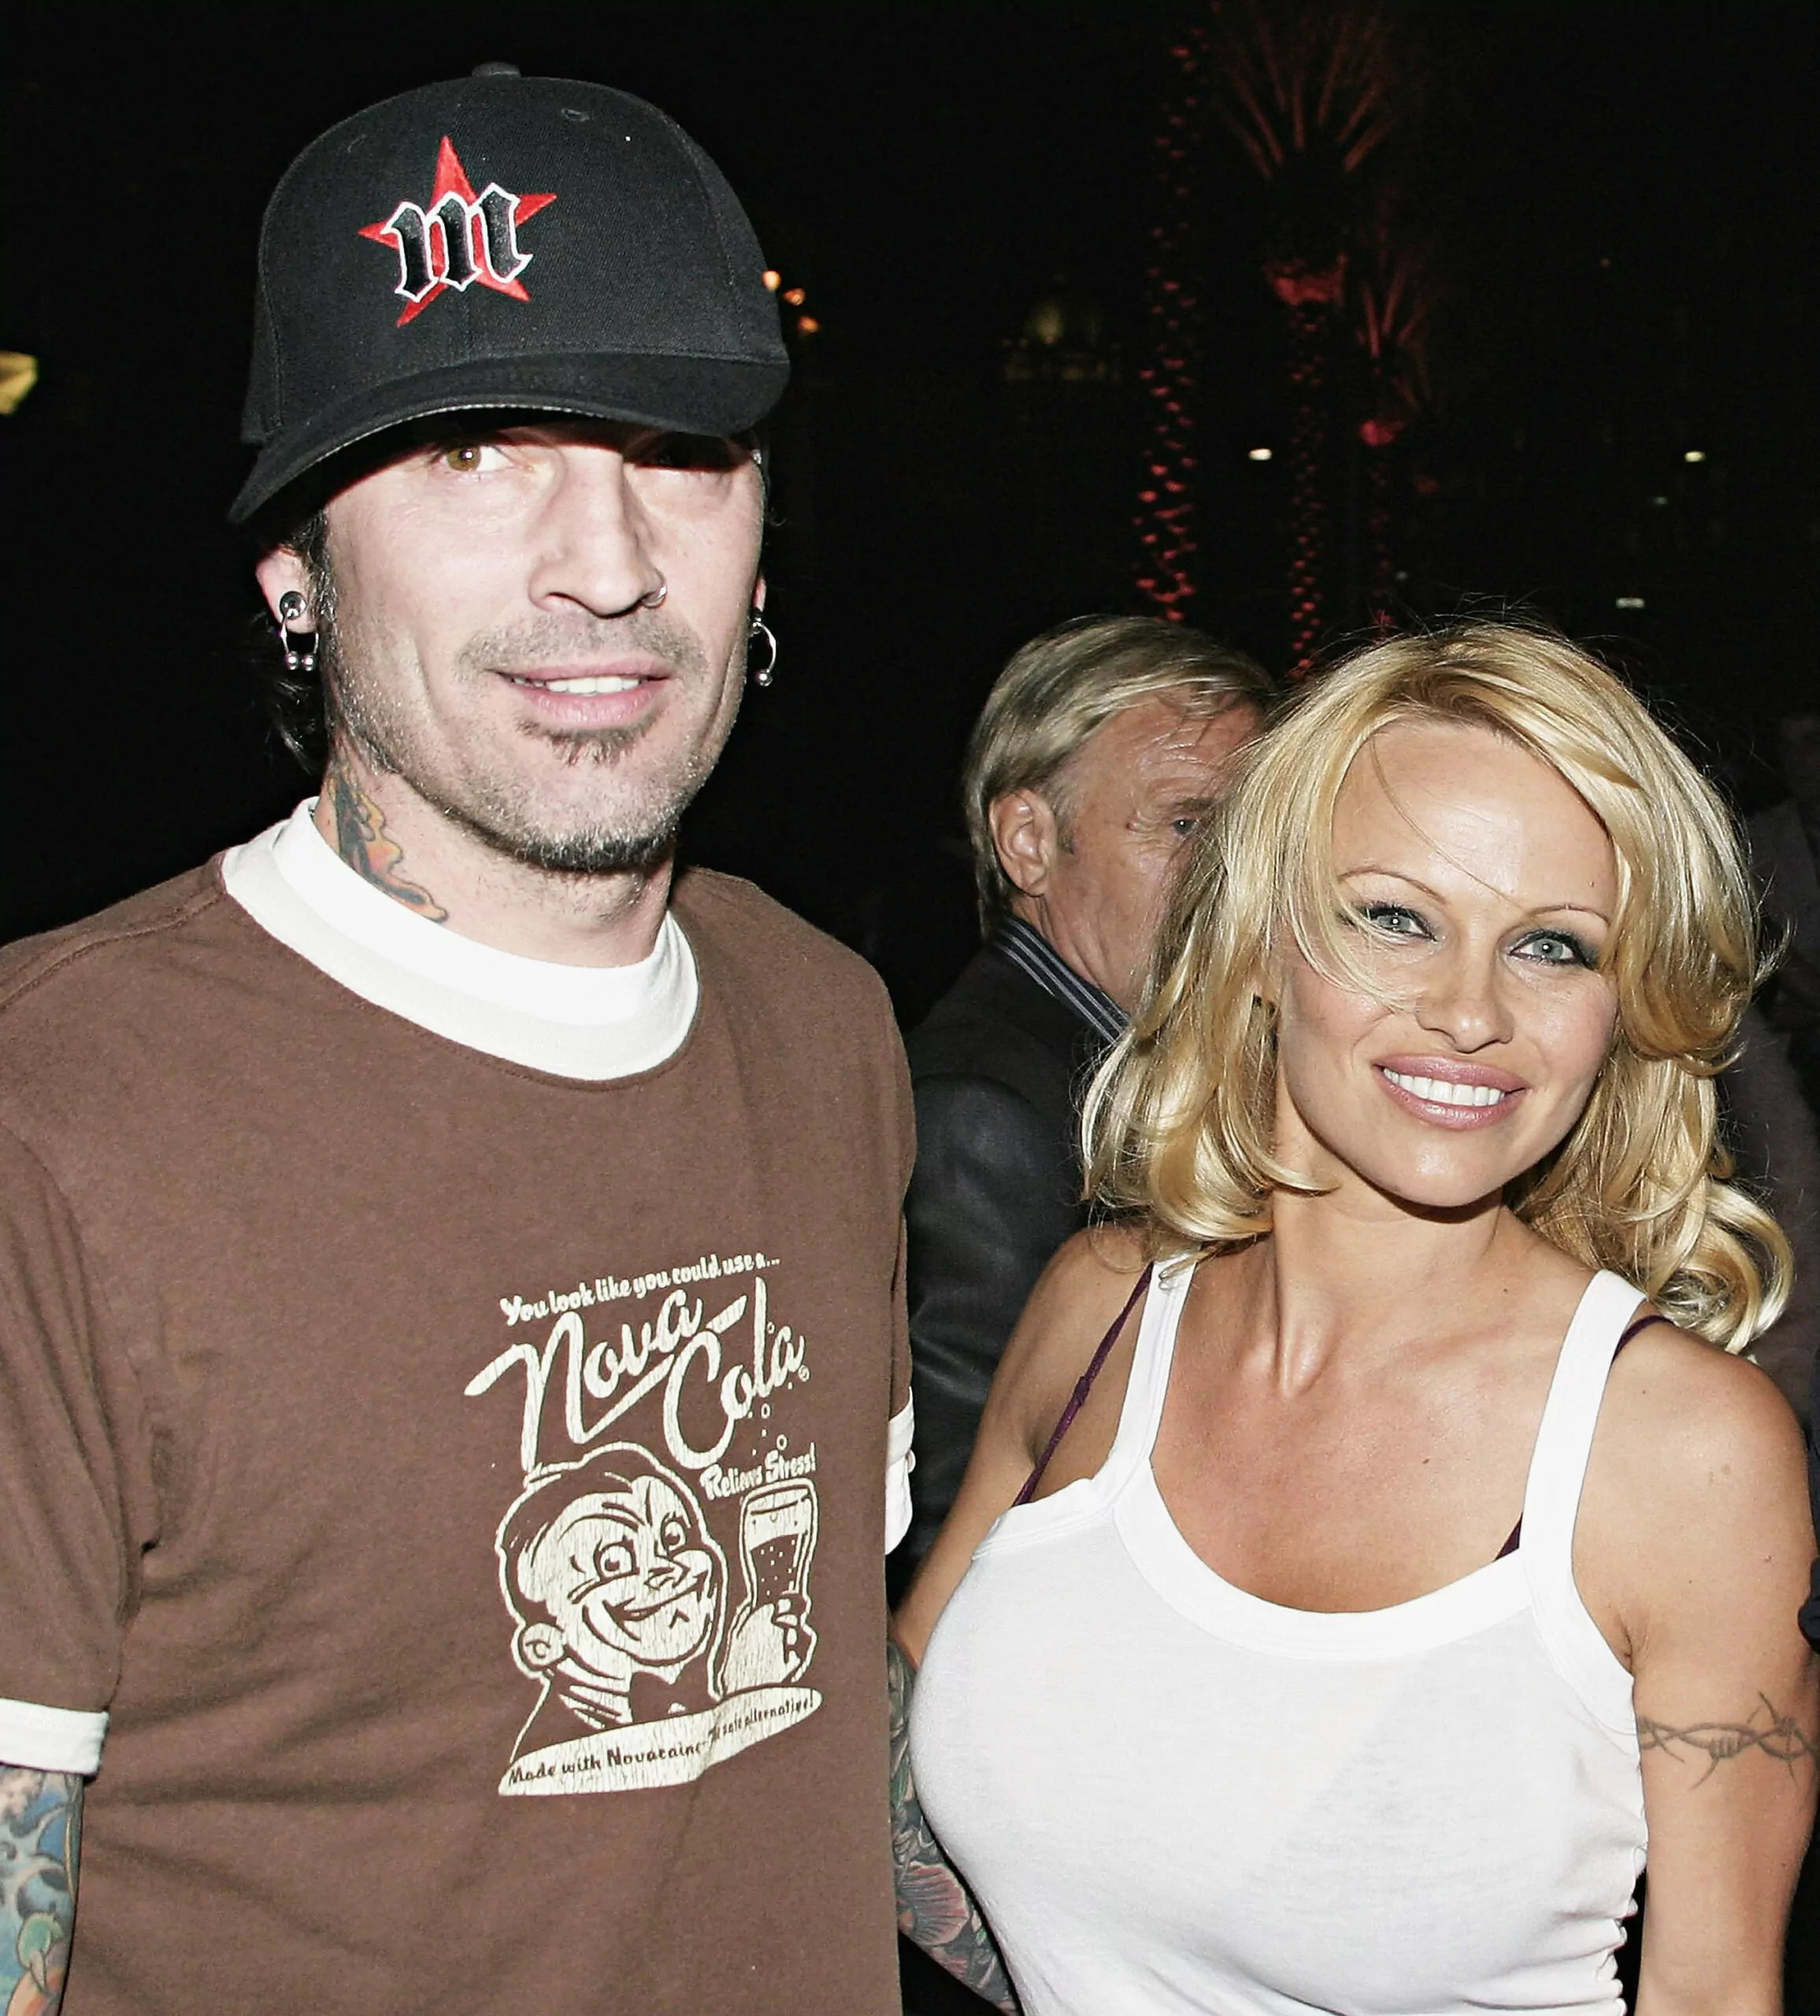 BEVERLY HILLS, CA - MARCH 28: Pamela Anderson and Tommy Lee arrive at the Rodeo Drive Walk of Style Event Honoring Tom Ford on March 28, 2004 in Beverly Hills, California. (Photo by Giulio Marcocchi/Getty Images)